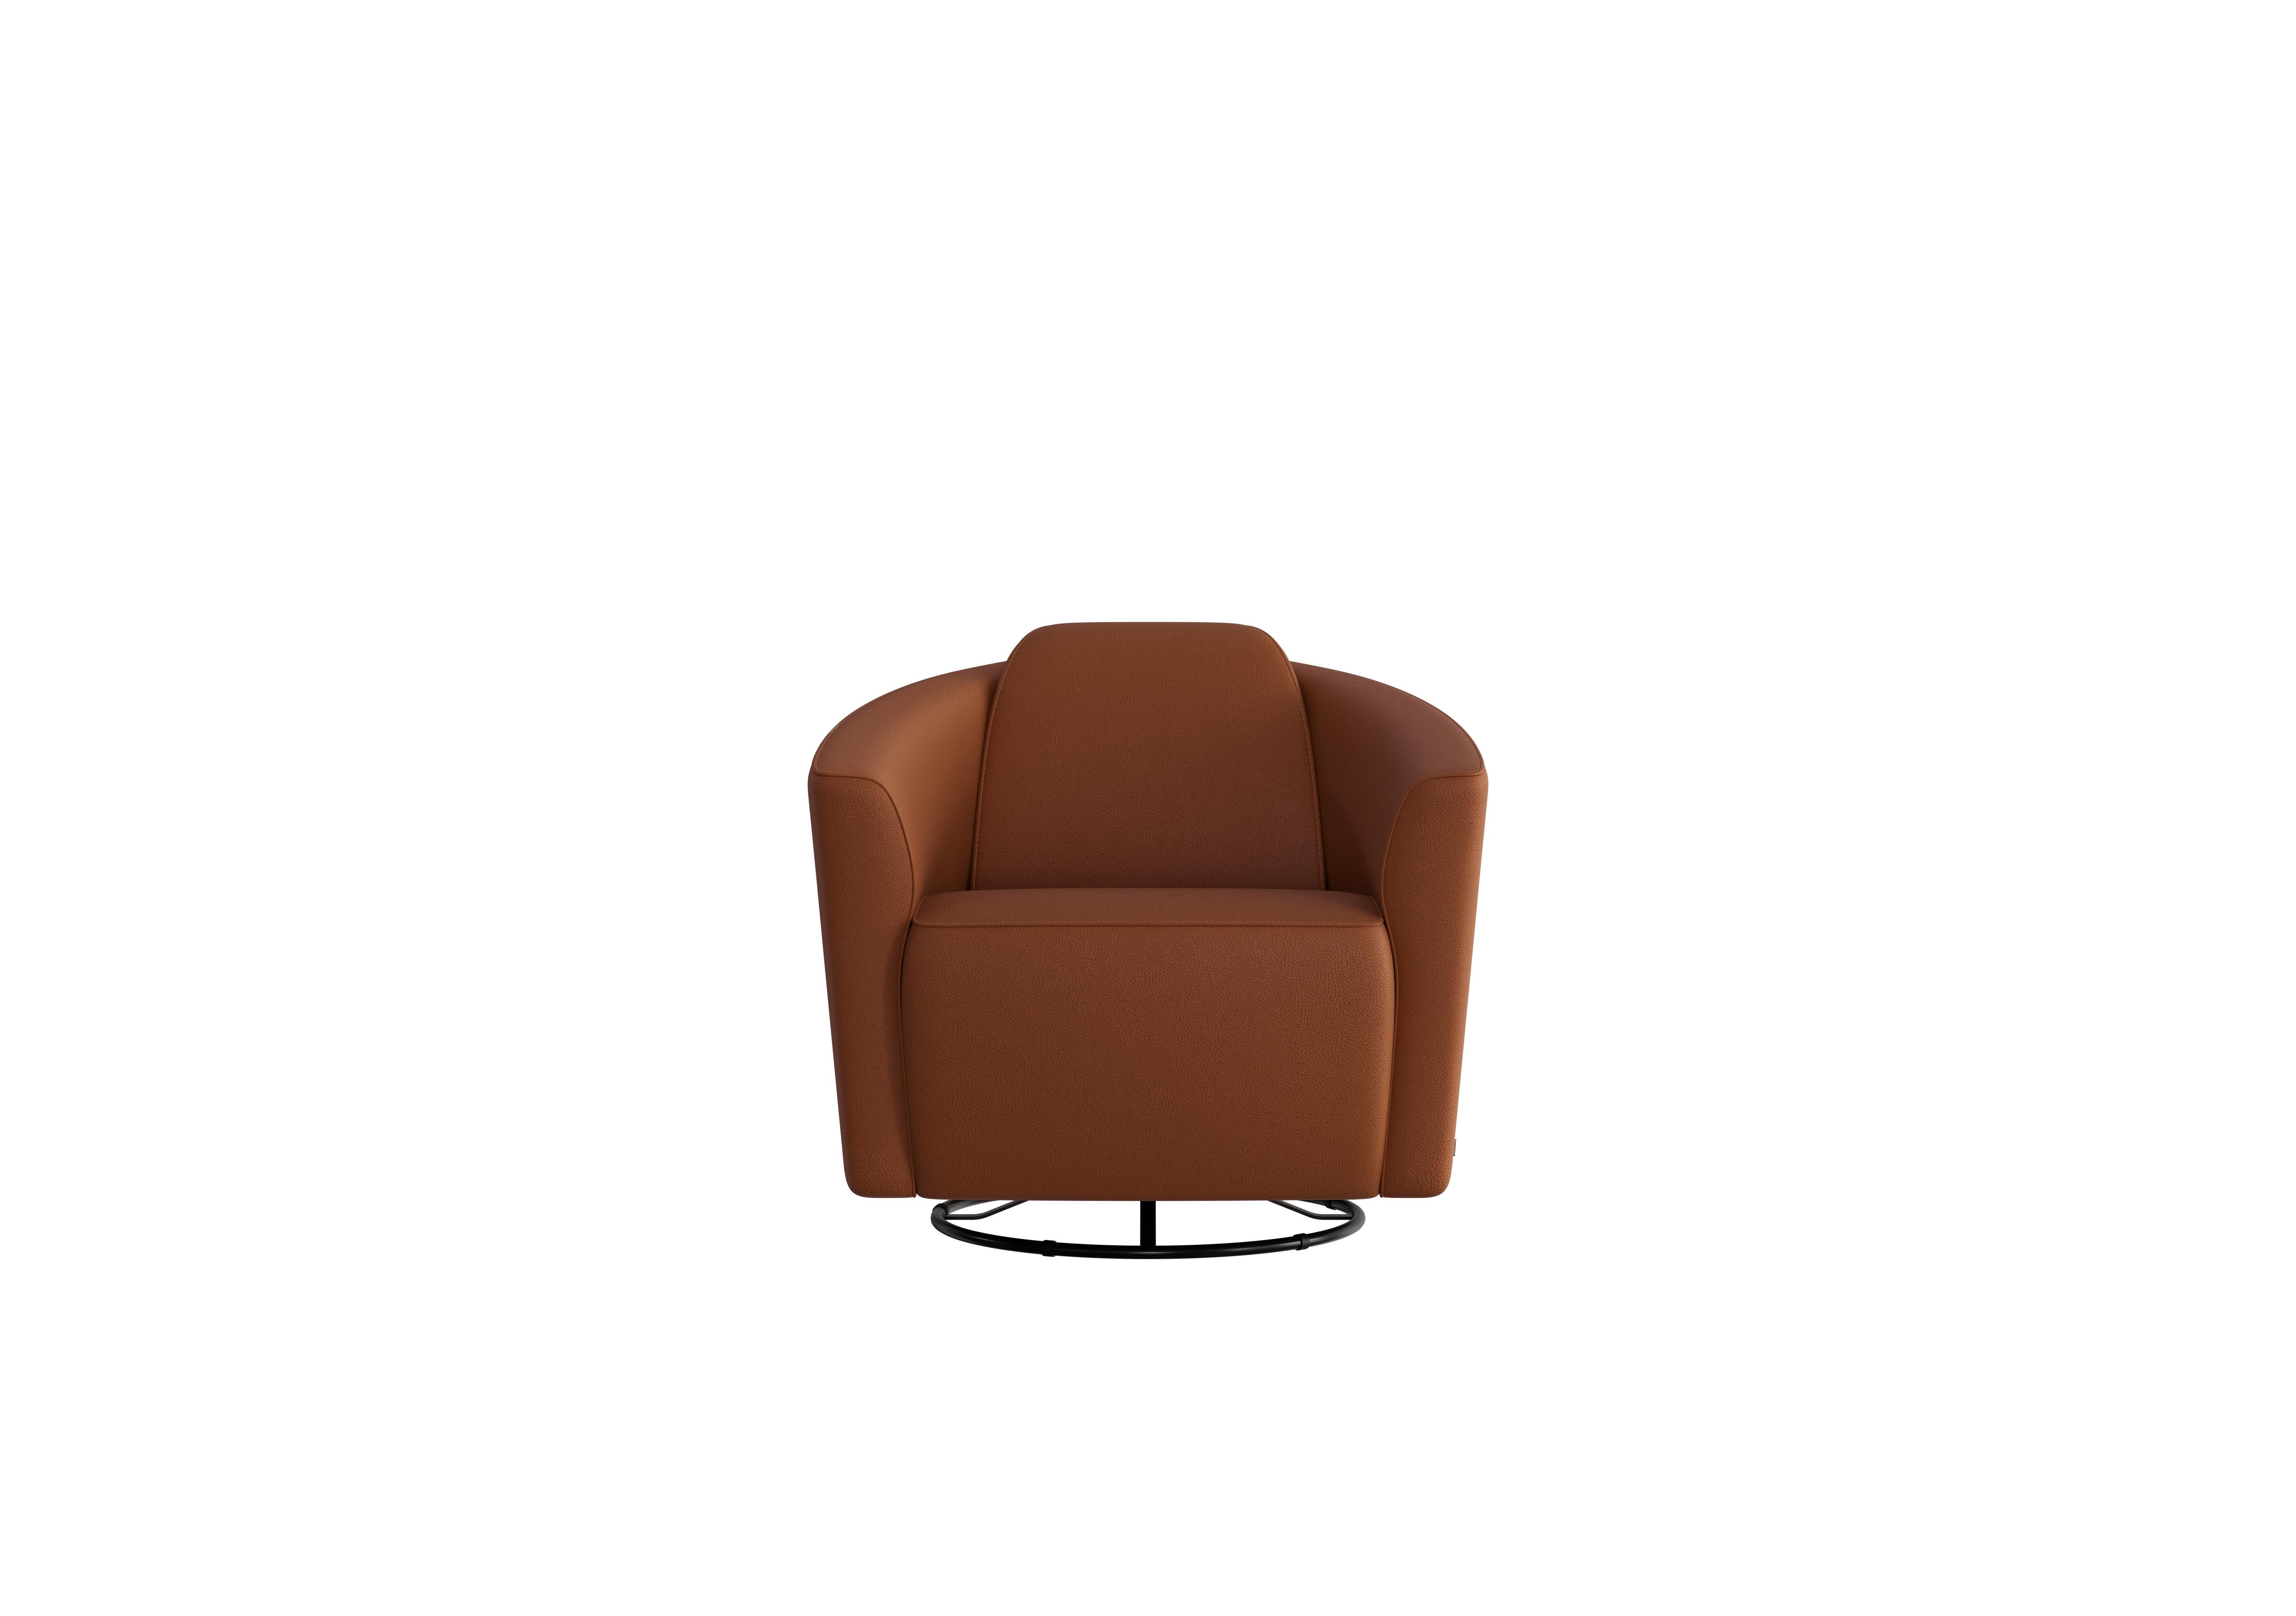 Ketty Leather Swivel Chair in Botero Cuoio 2151 on Furniture Village